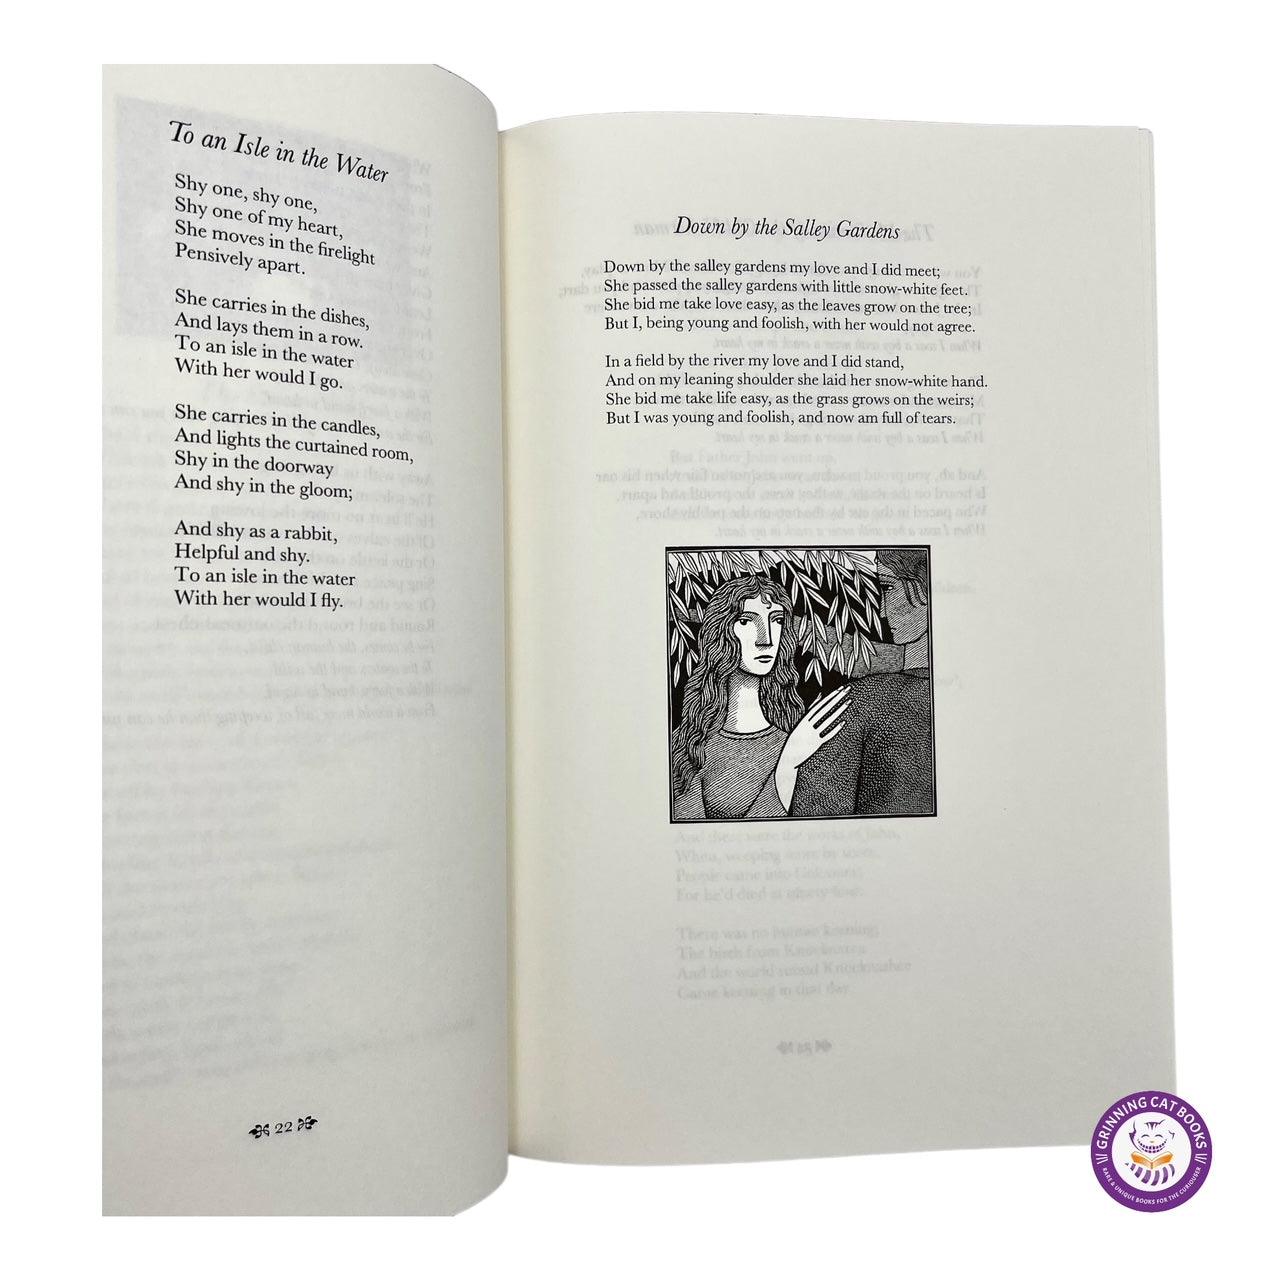 W.B. Yeats (deluxe "Folio Poets" edition from The Folio Society) - Grinning Cat Books - Books - POETRY